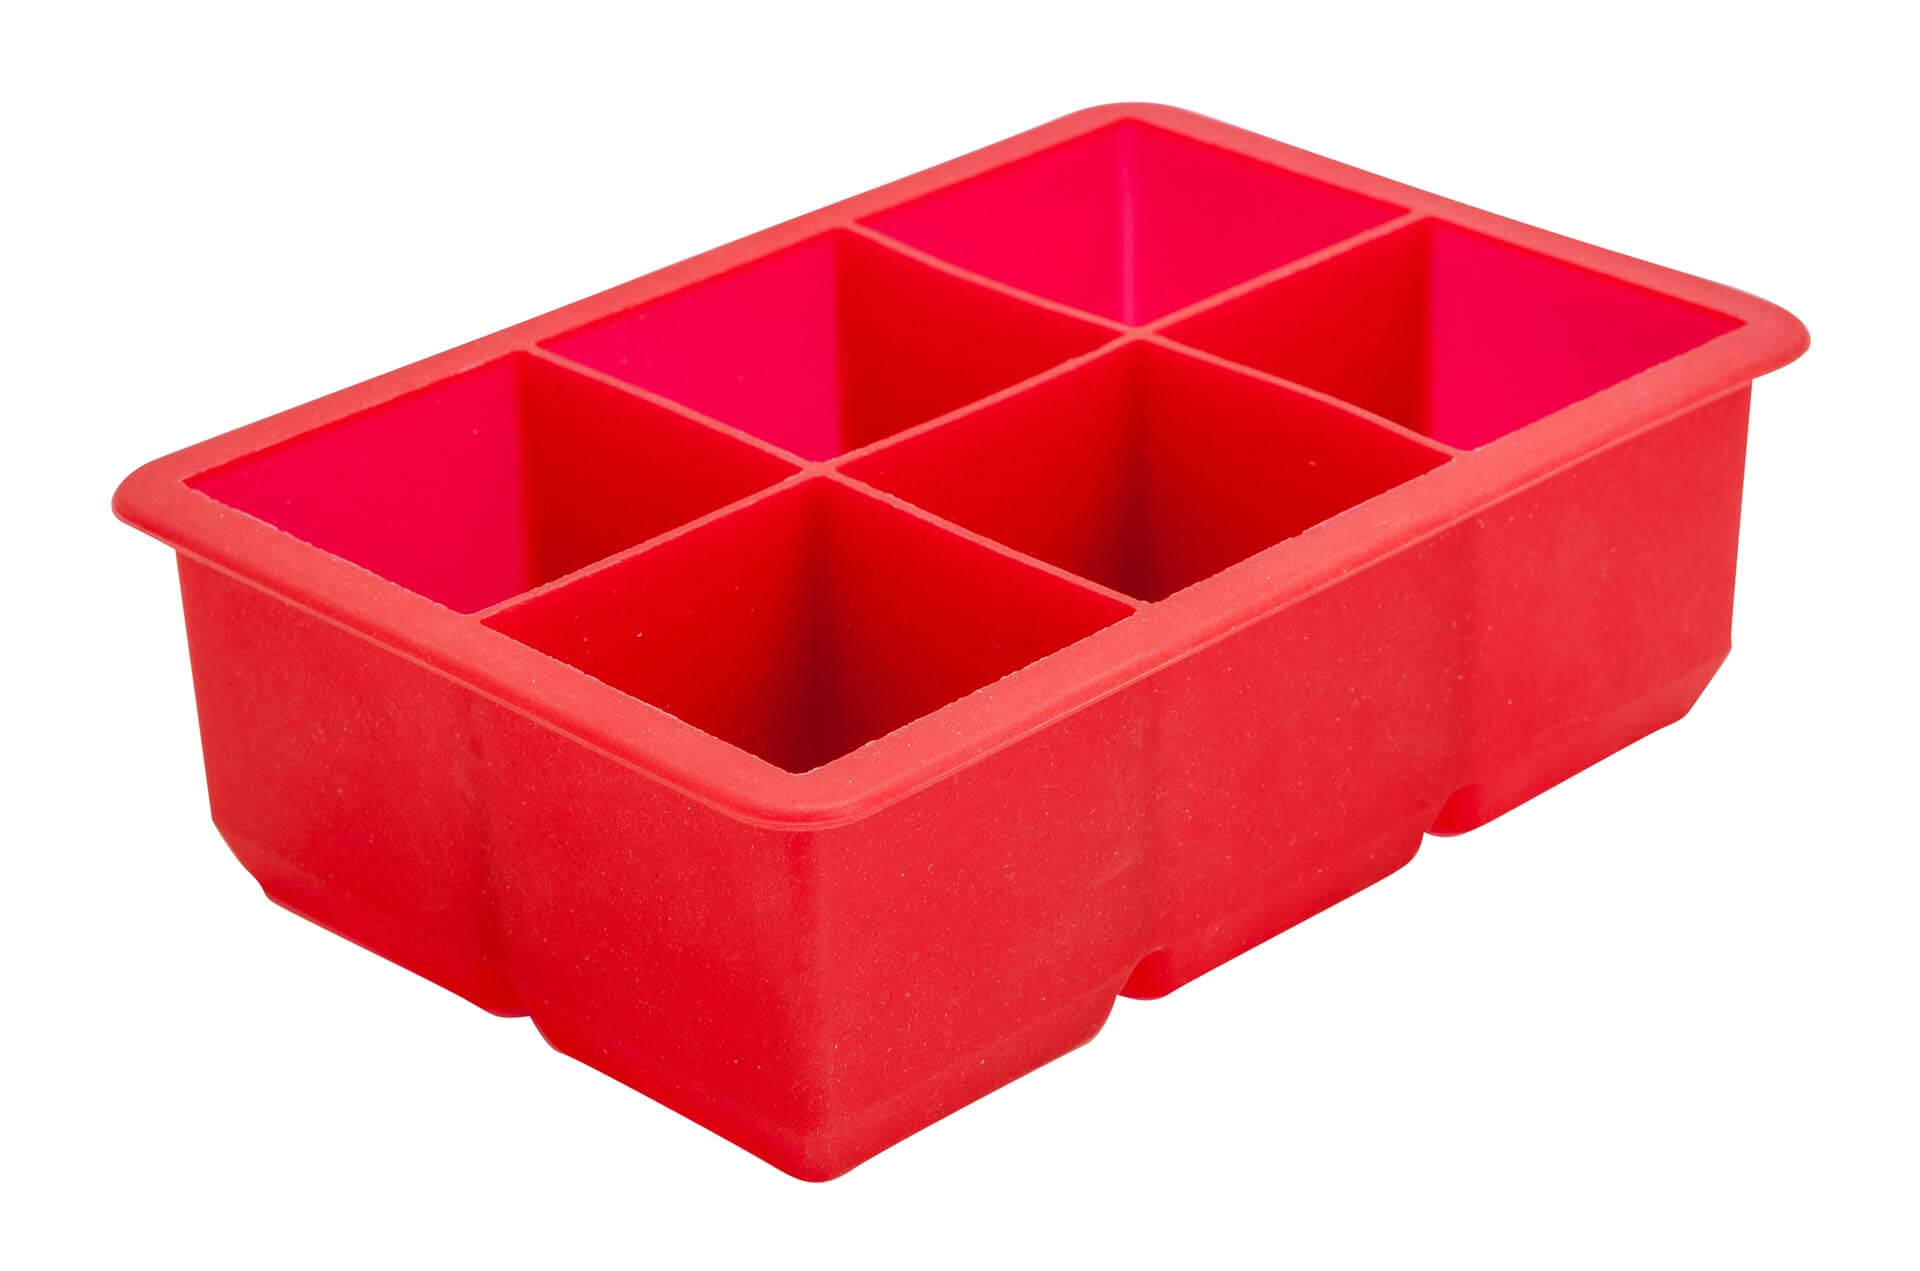 https://beaumonttm.co.uk/wp-content/uploads/3350-Red-Ice-Mould-6-cavity.jpg